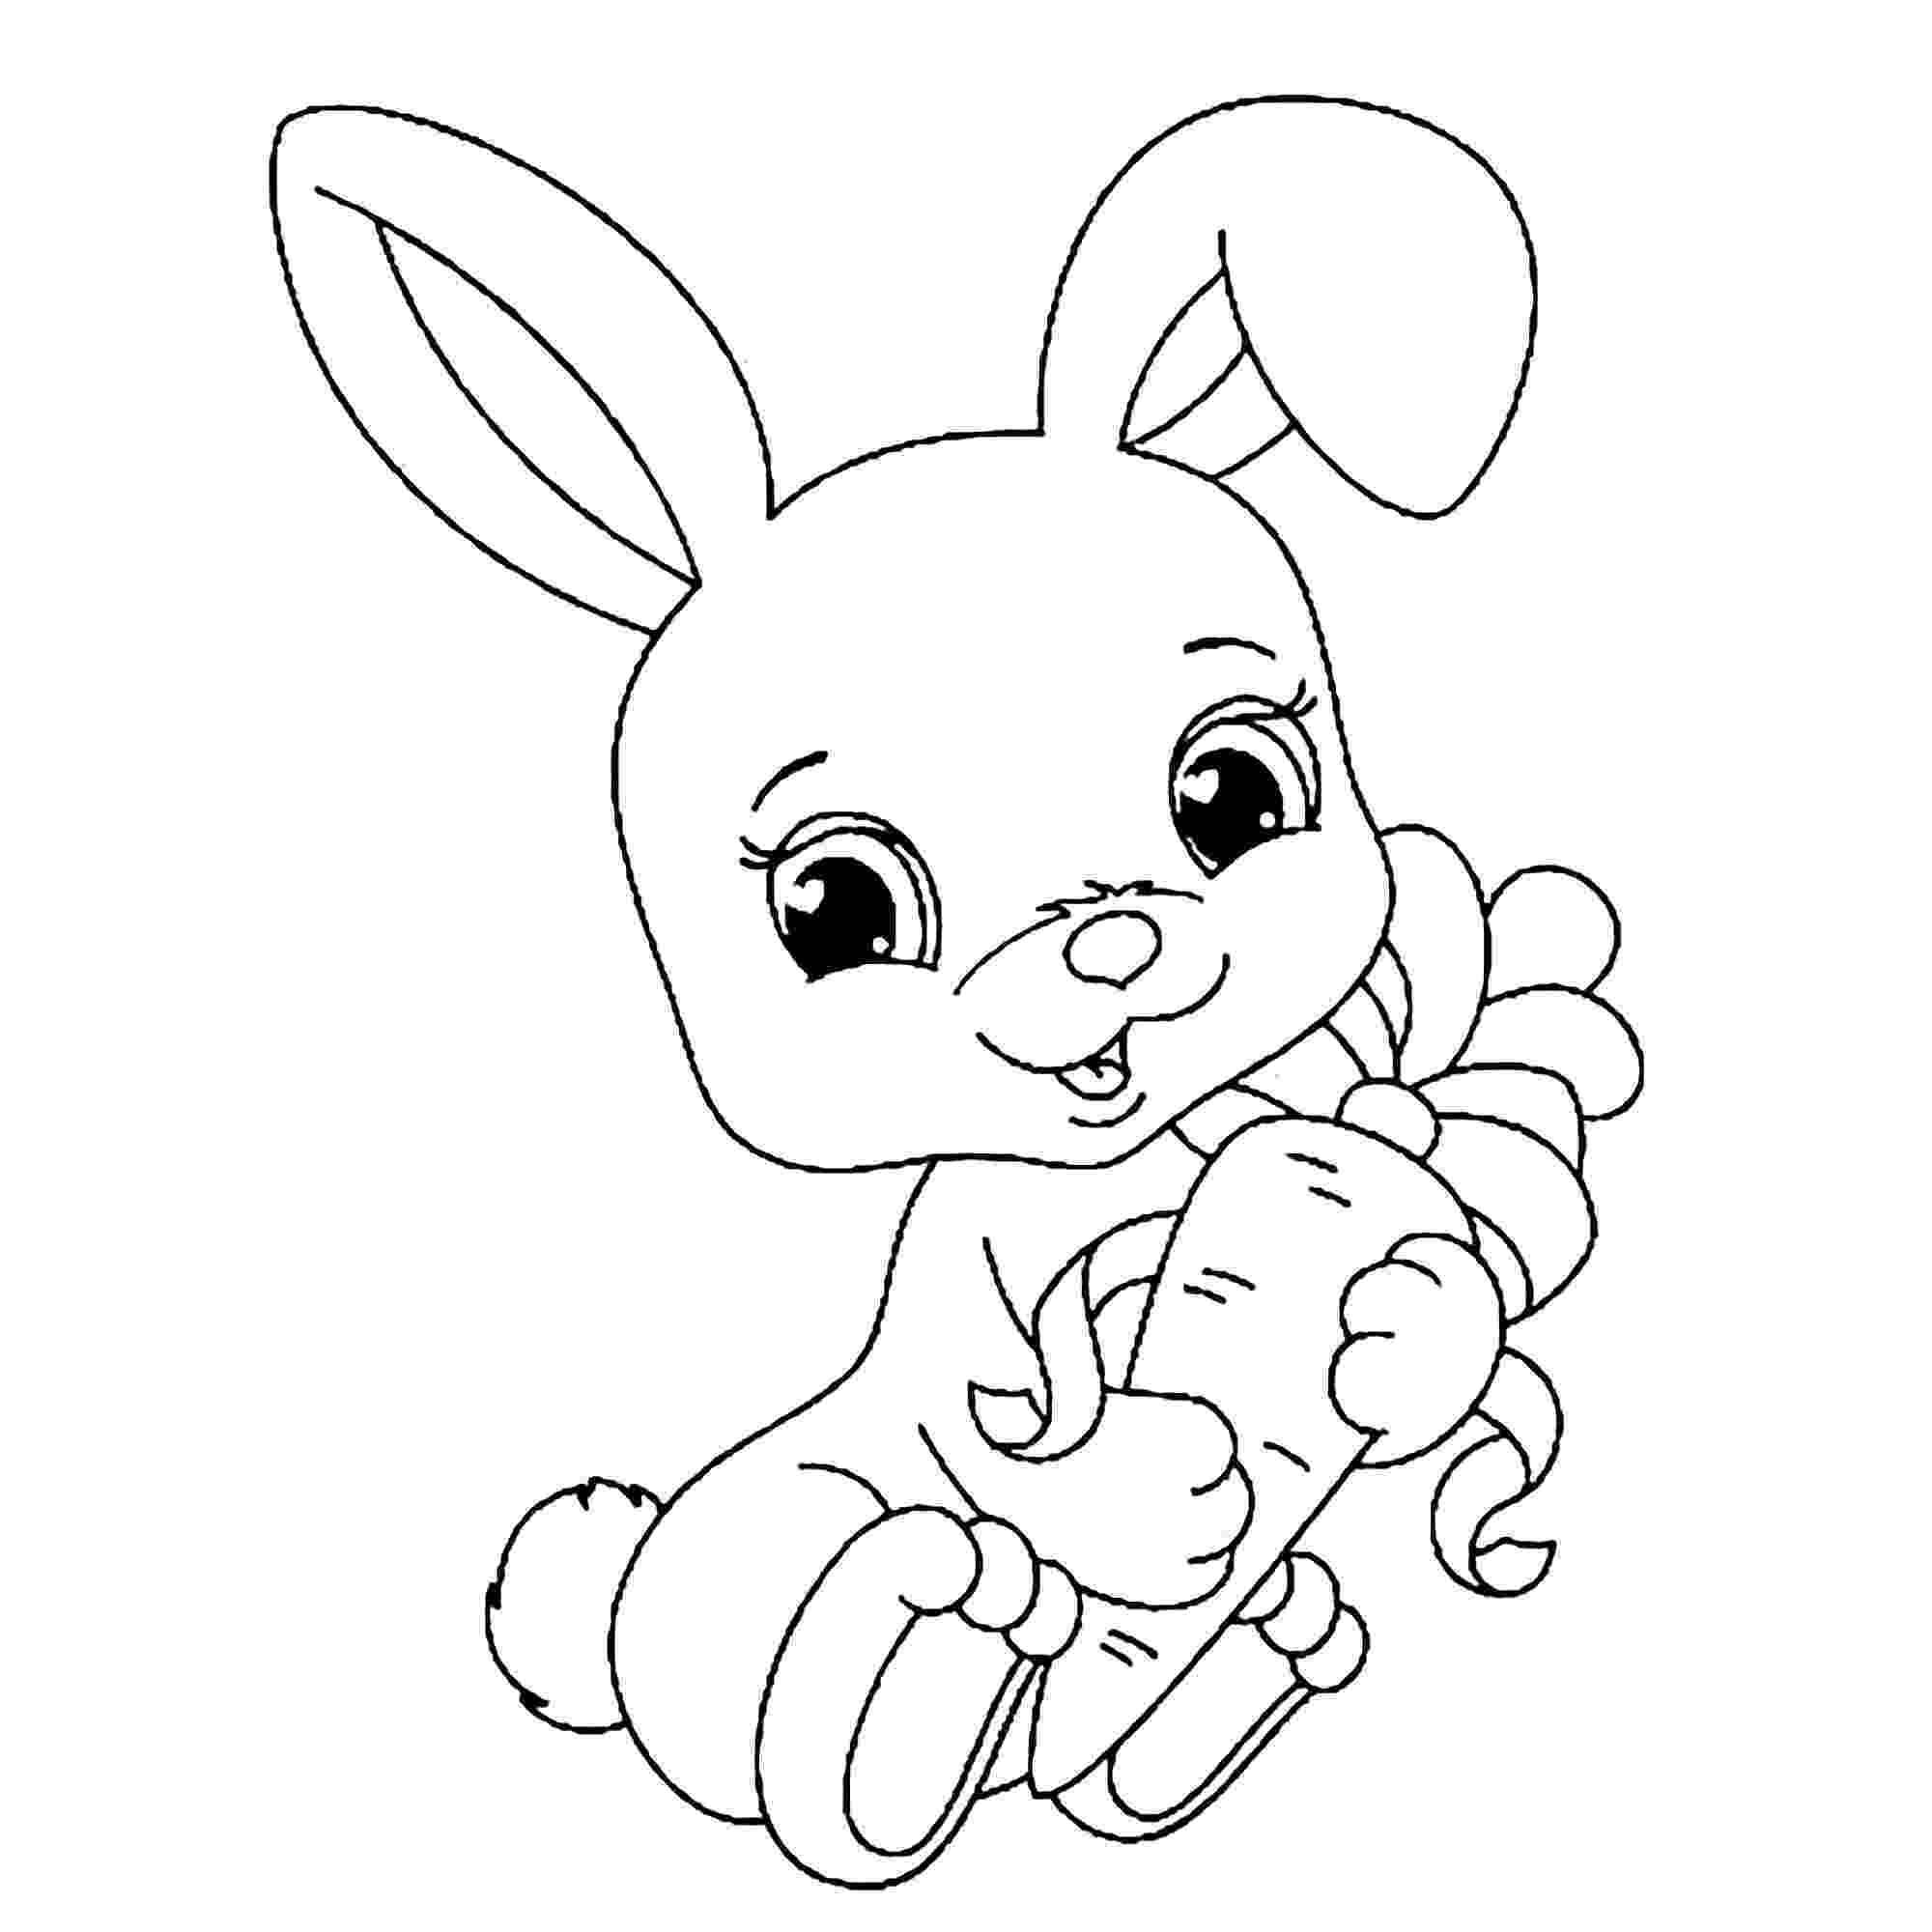 rabbit coloring pages printable cute baby bunnies coloring pages getcoloringpagescom pages coloring rabbit printable 